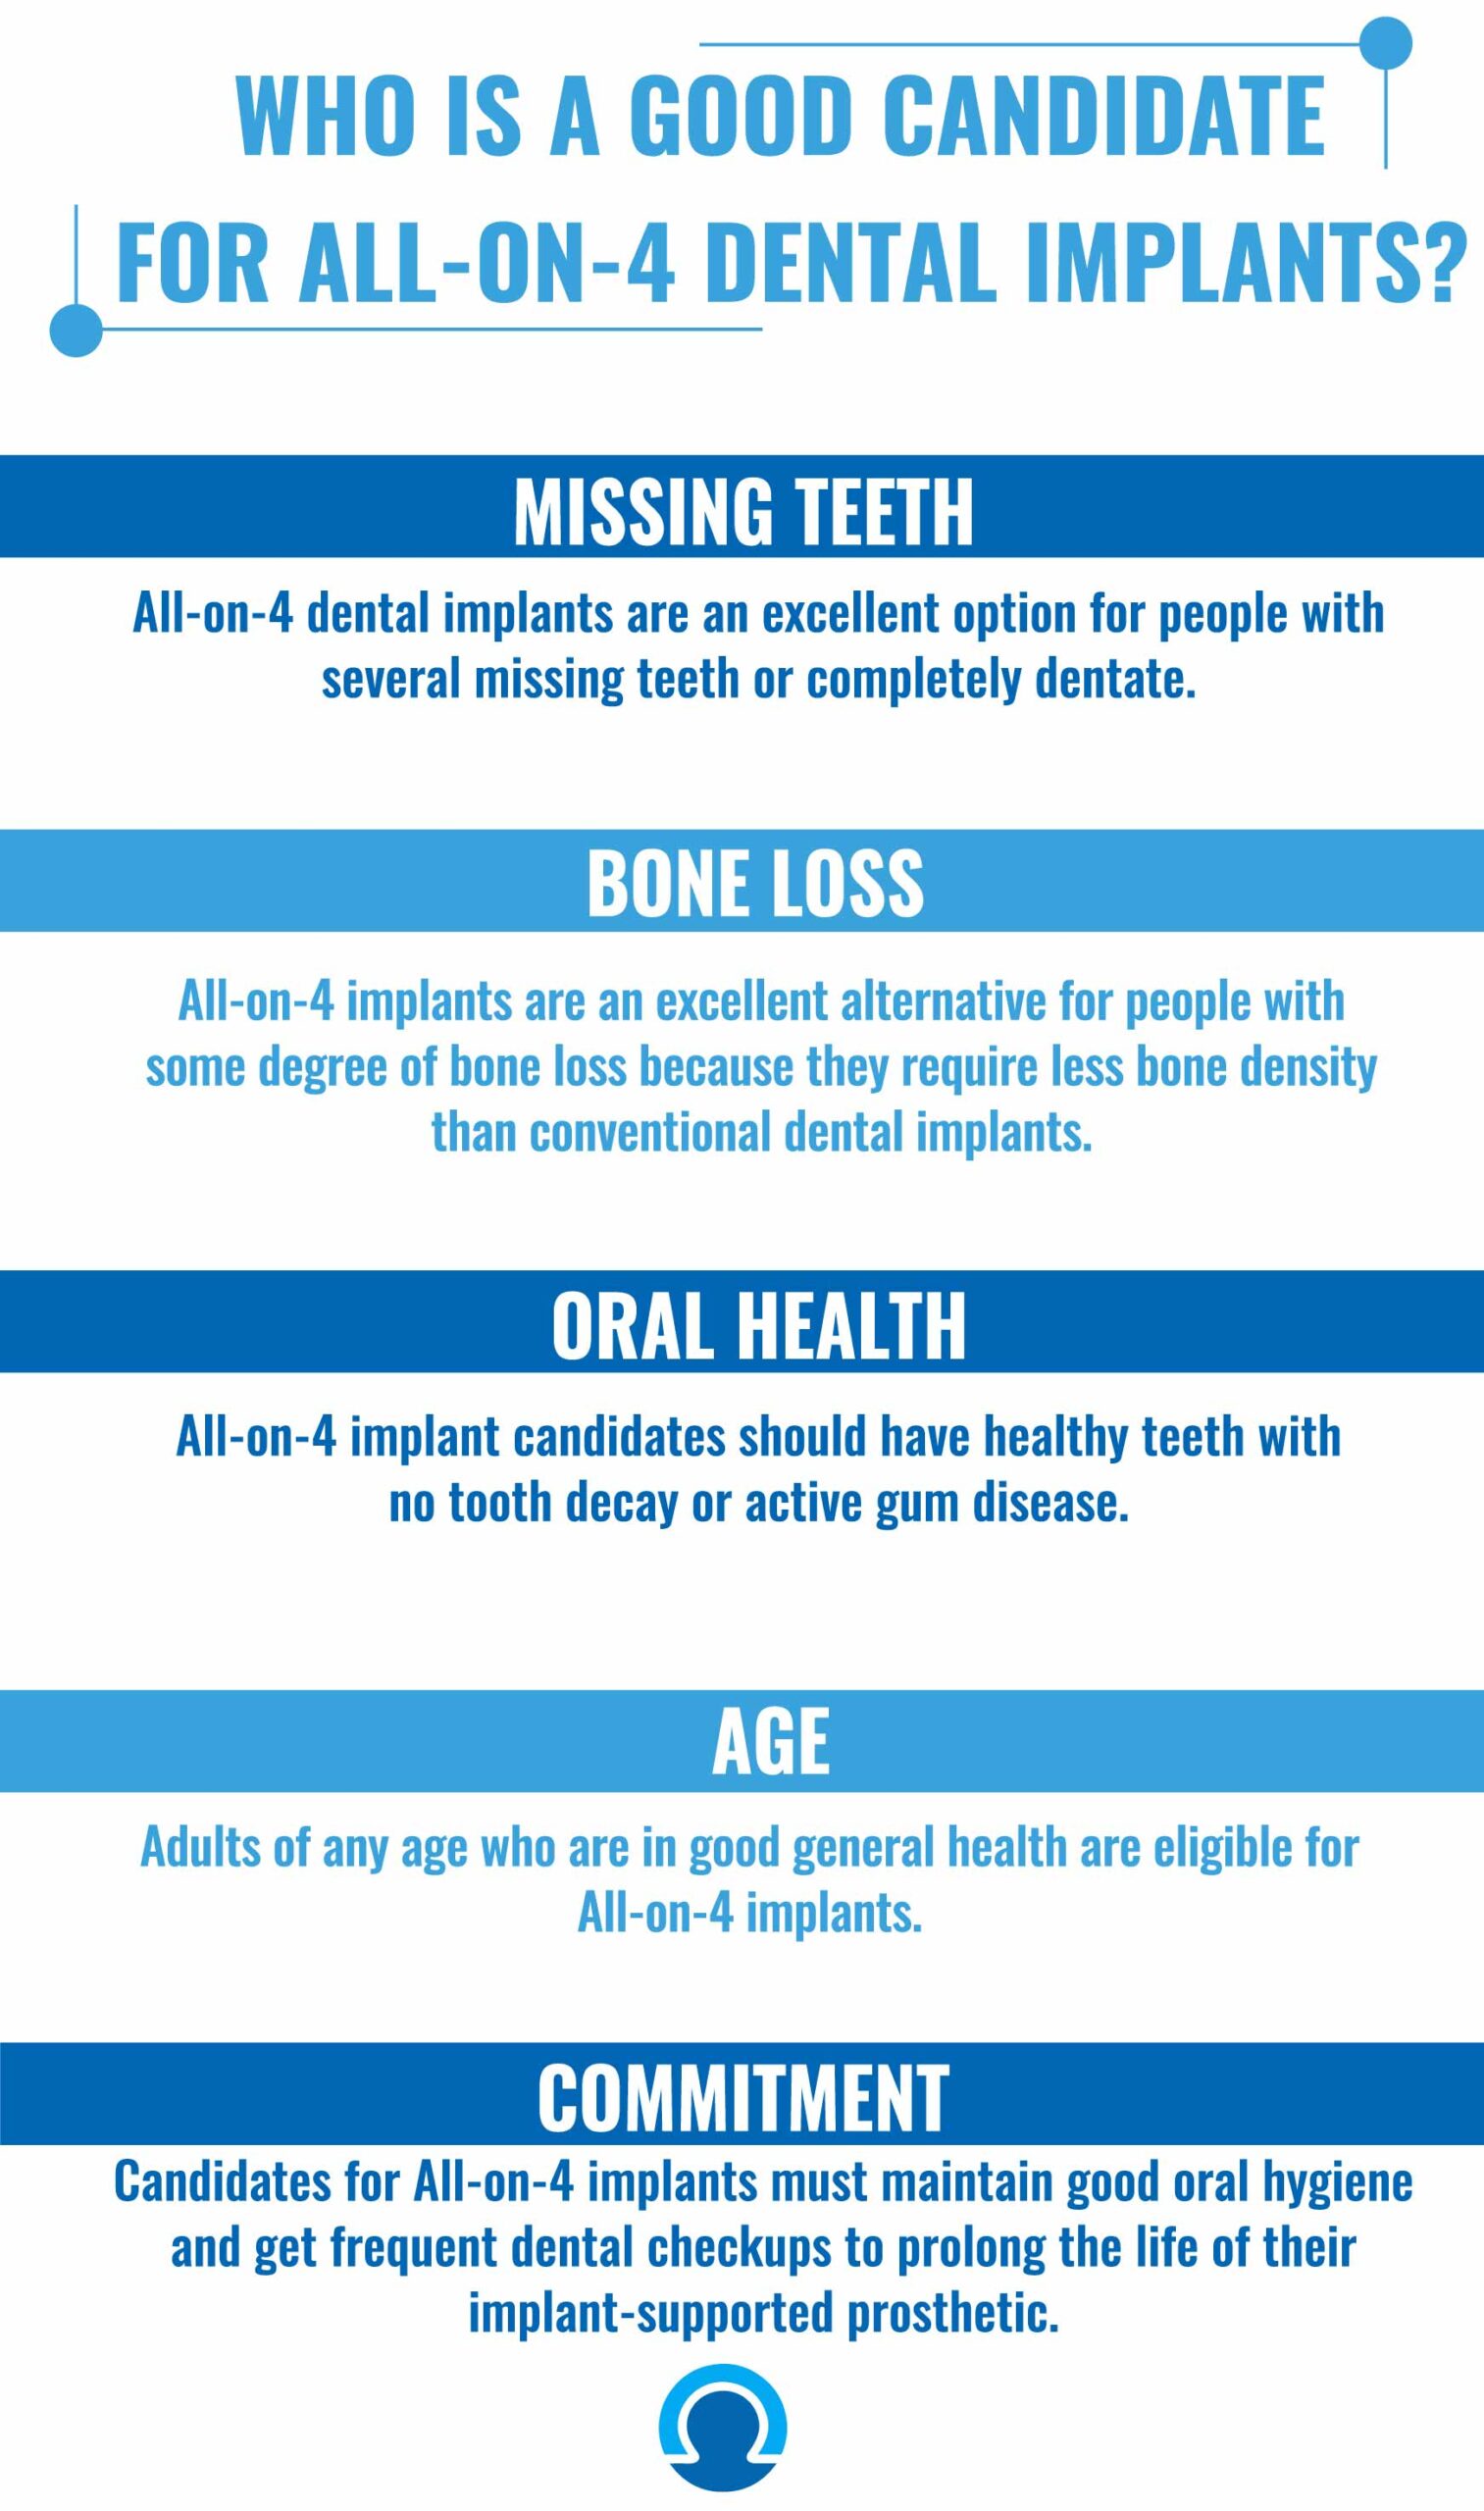 Professional All-on-4 Dental Implants in Houston, Texas